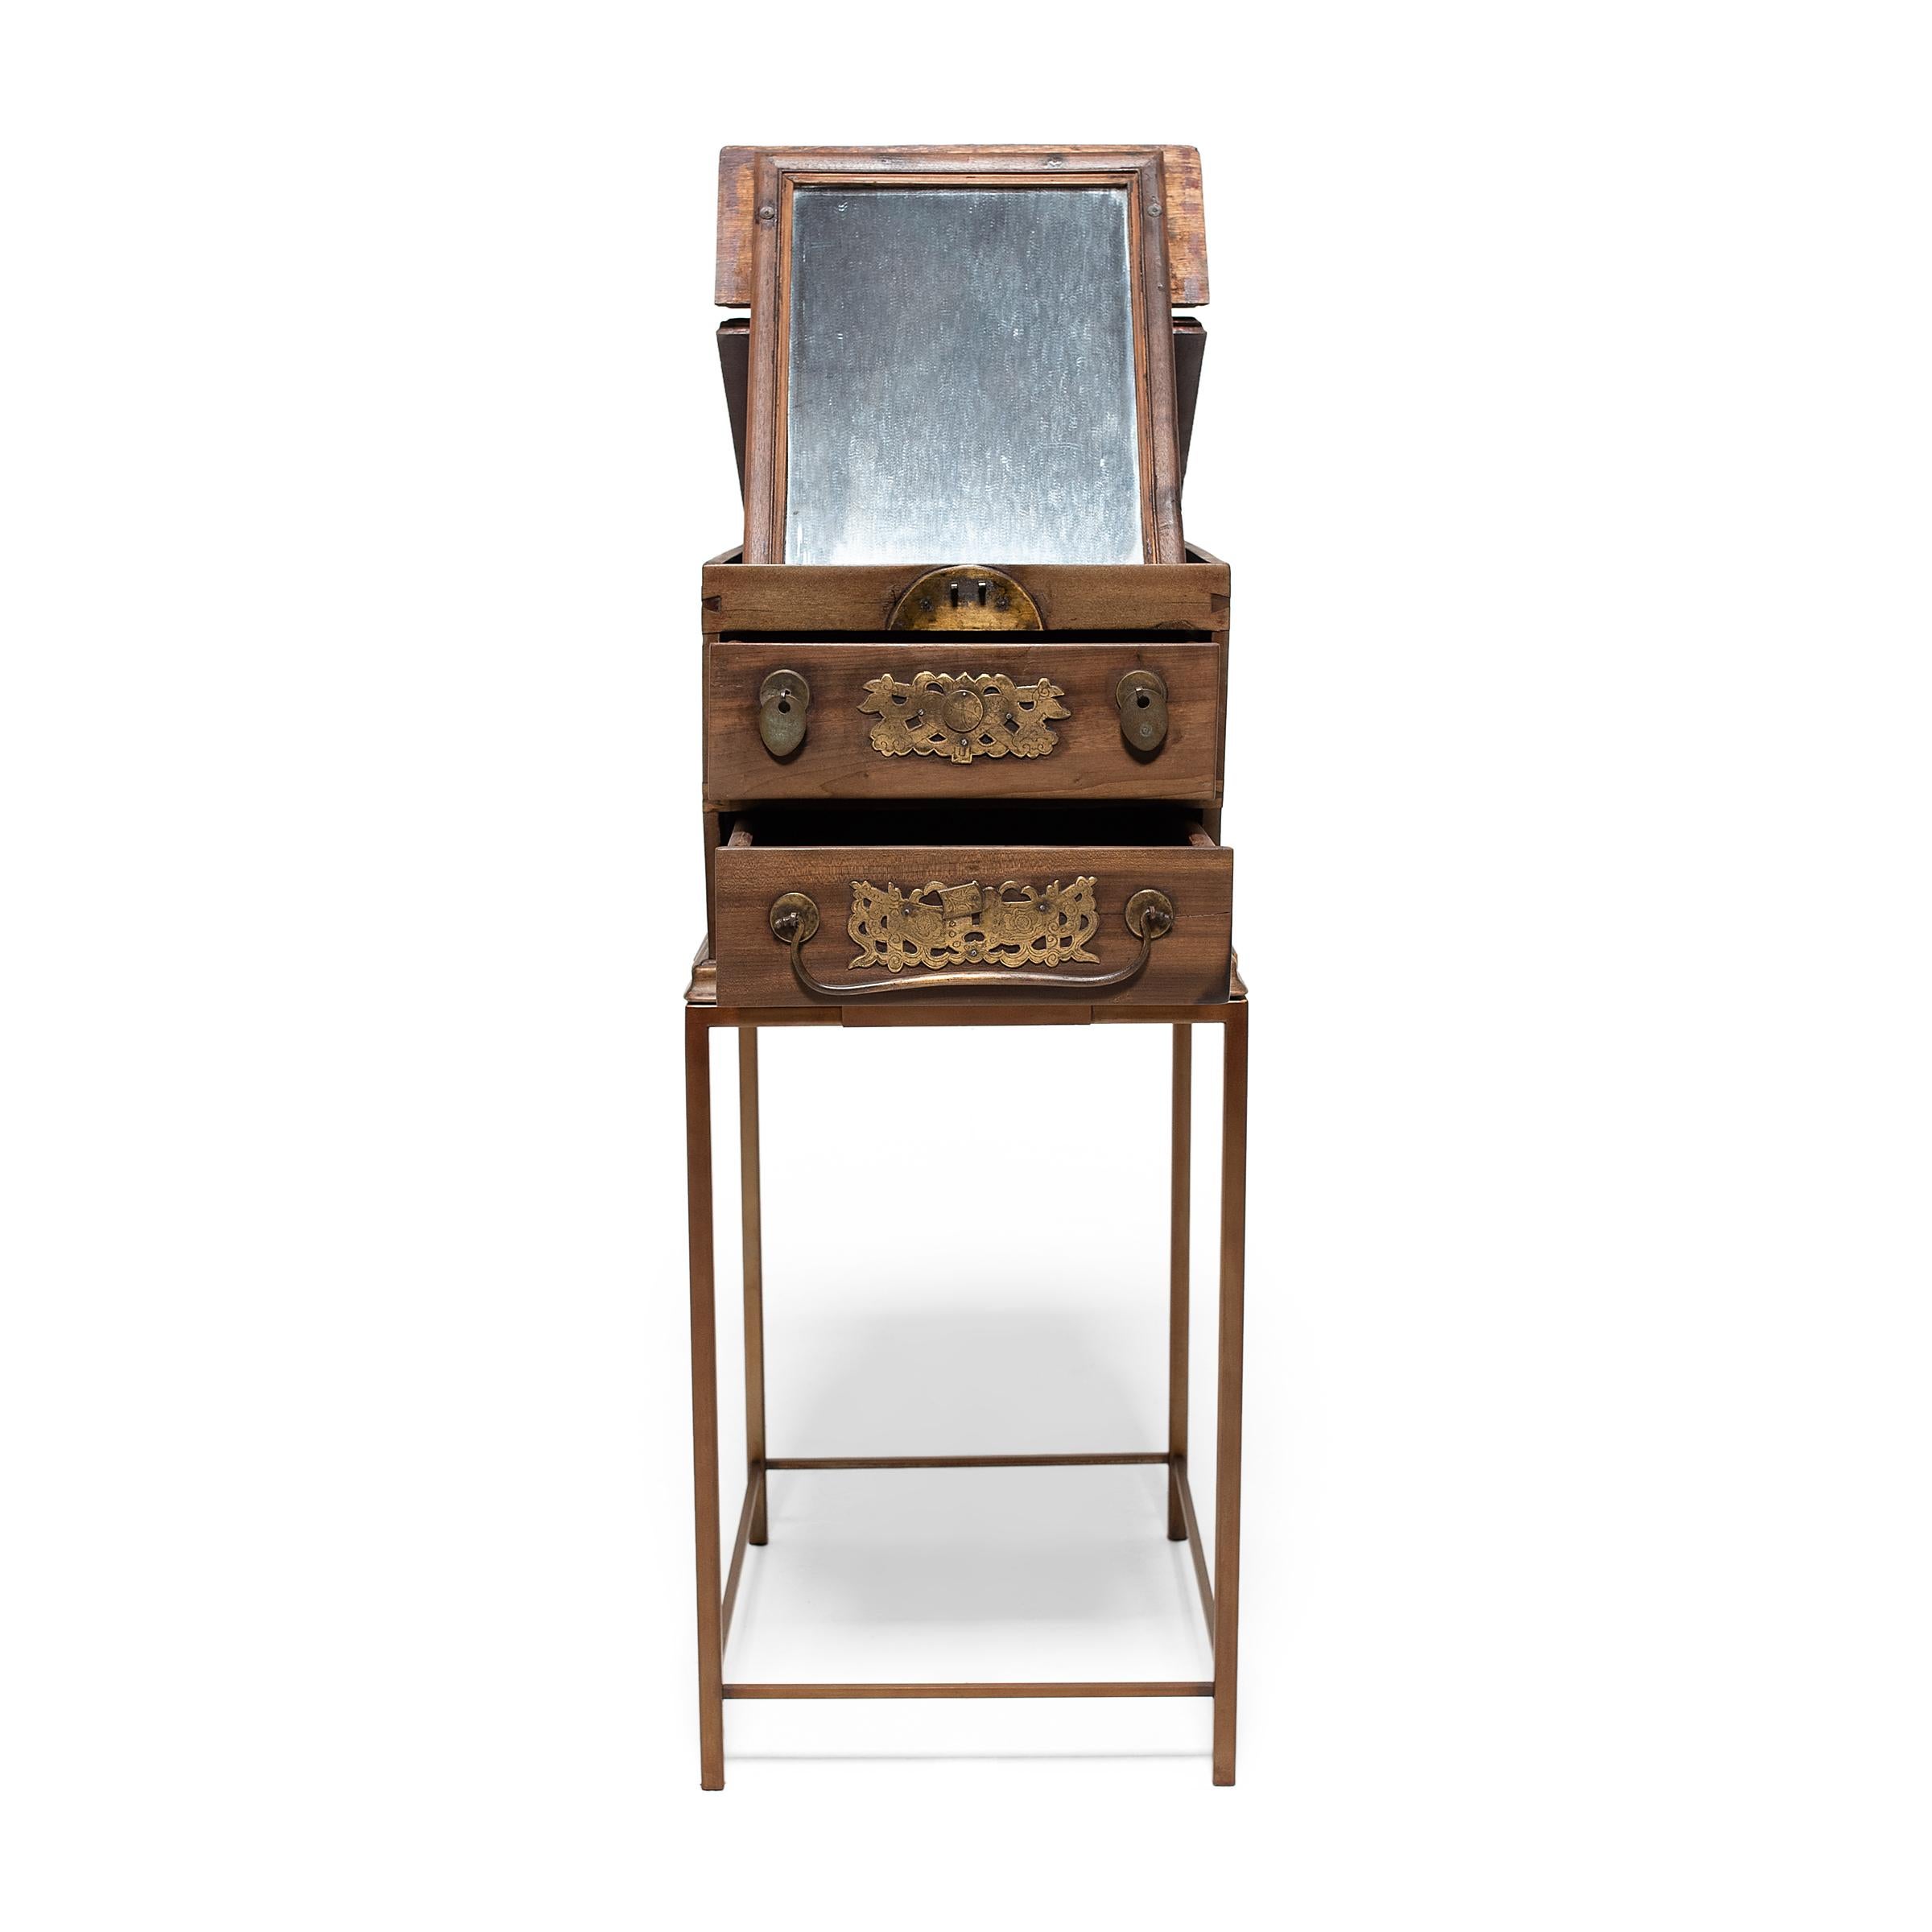 20th Century Chinese Jewelry Box Side Table, c. 1900